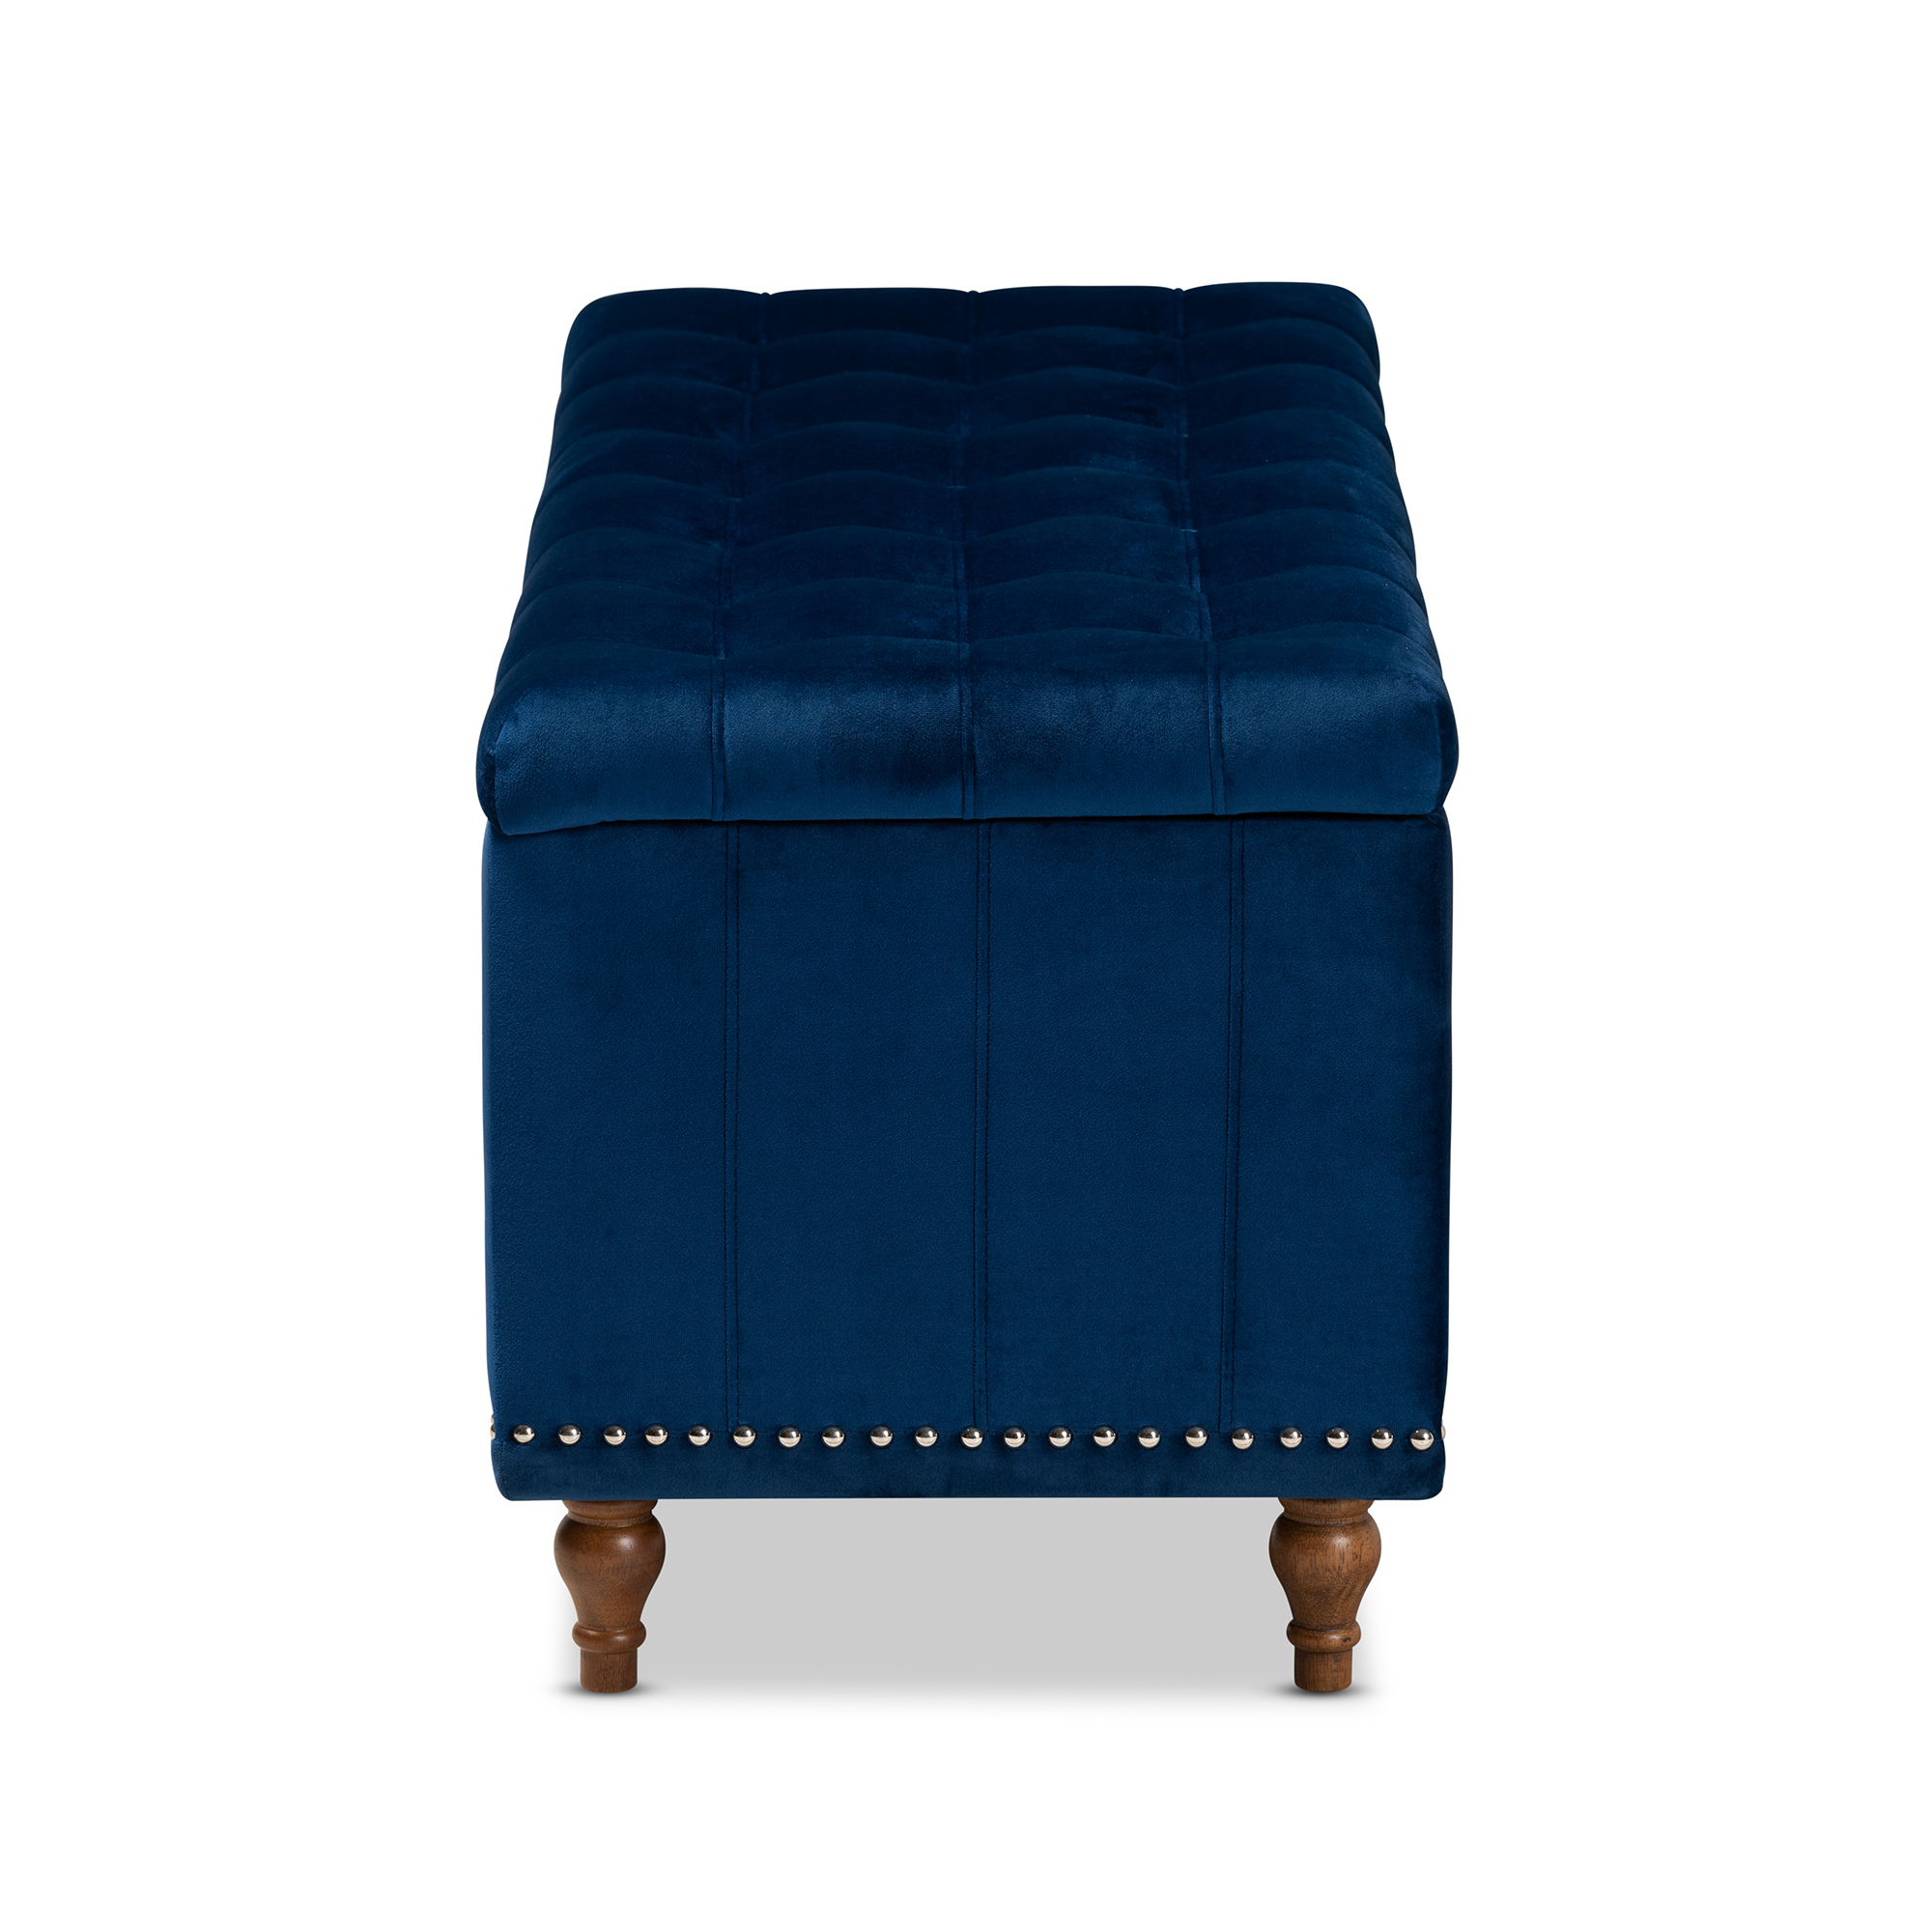 Baxton Studio Kaylee Modern and Contemporary Navy Blue Velvet Fabric Upholstered Button-Tufted Storage Ottoman Bench - image 5 of 11